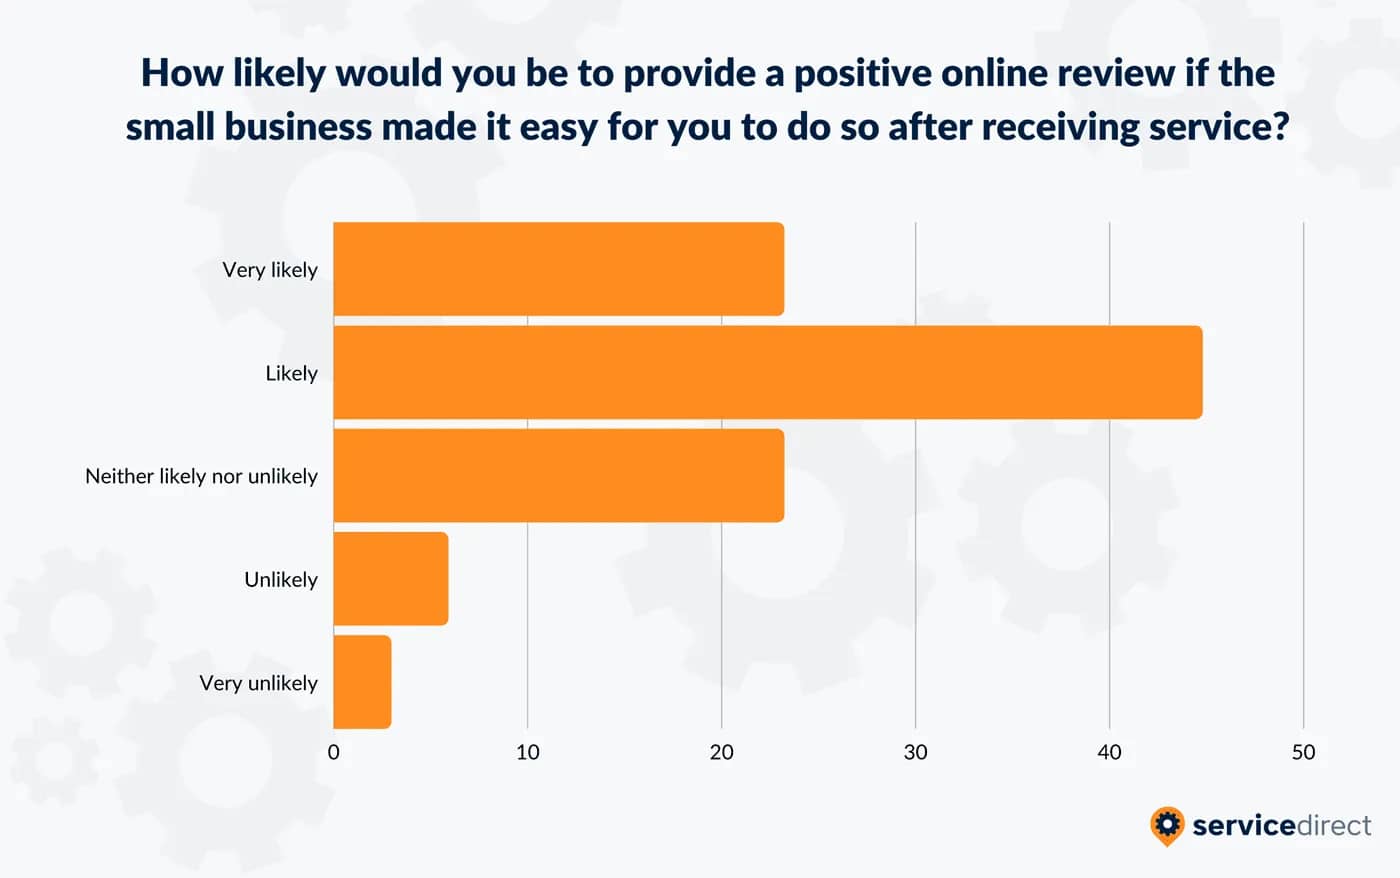 71% of consumers are likely to leave a positive review if a business makes it easy for them to do so. 